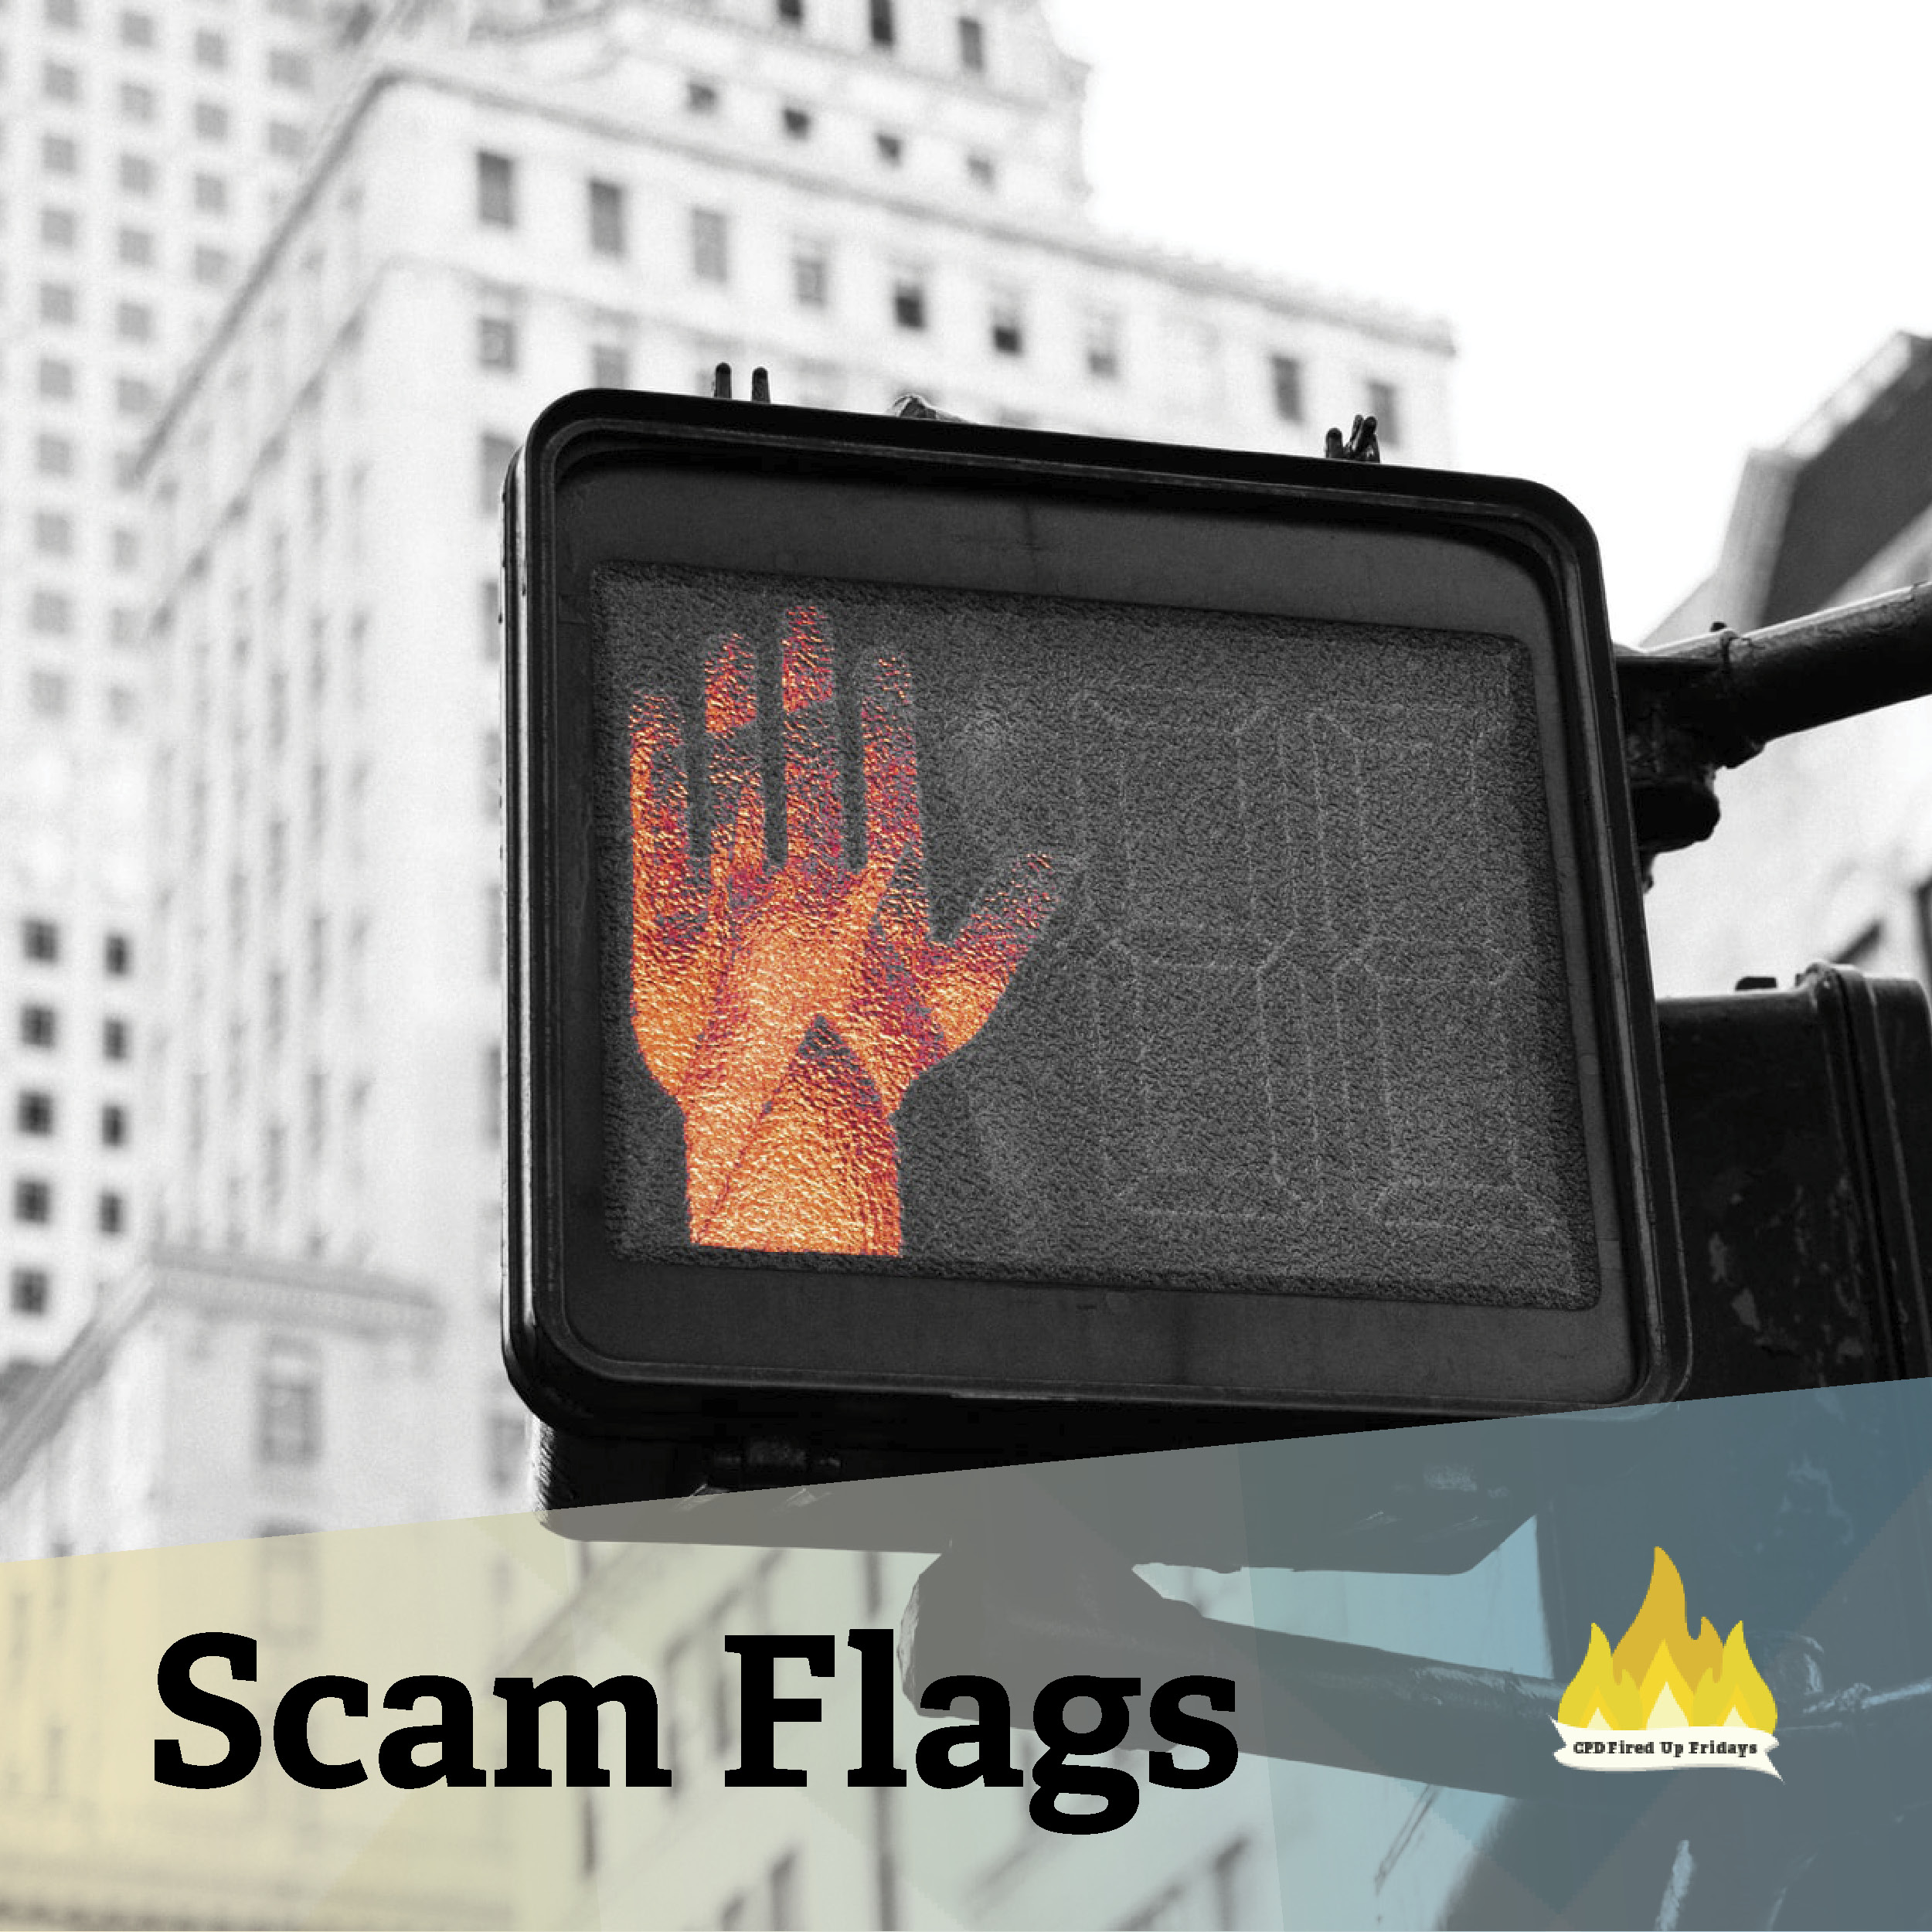 A red hand illuminates crosswalk sign, with white buildings visible in the distance. Underneath the image, text reads: 'Scam Flags.'